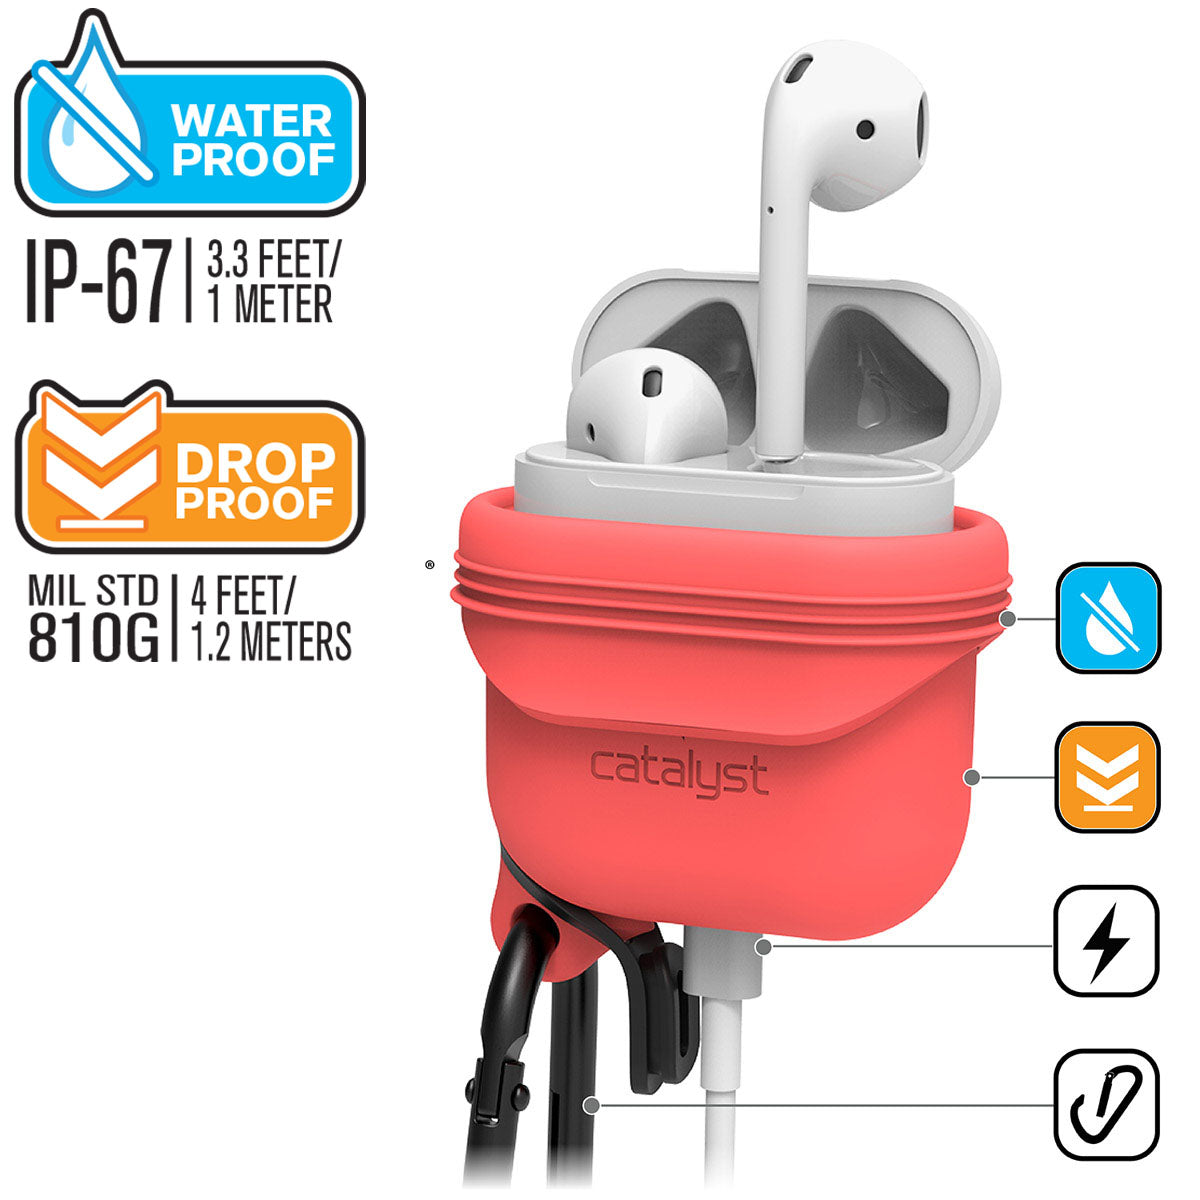 CATAPDCOR | Catalyst airpods gen2/1 waterproof case + carabiner showing the case drop proof and water proof features in coral text reads water proof IP-67 3.3 FEET/1 METER DROP PROOF MIL STD 810G 1.2 METERS